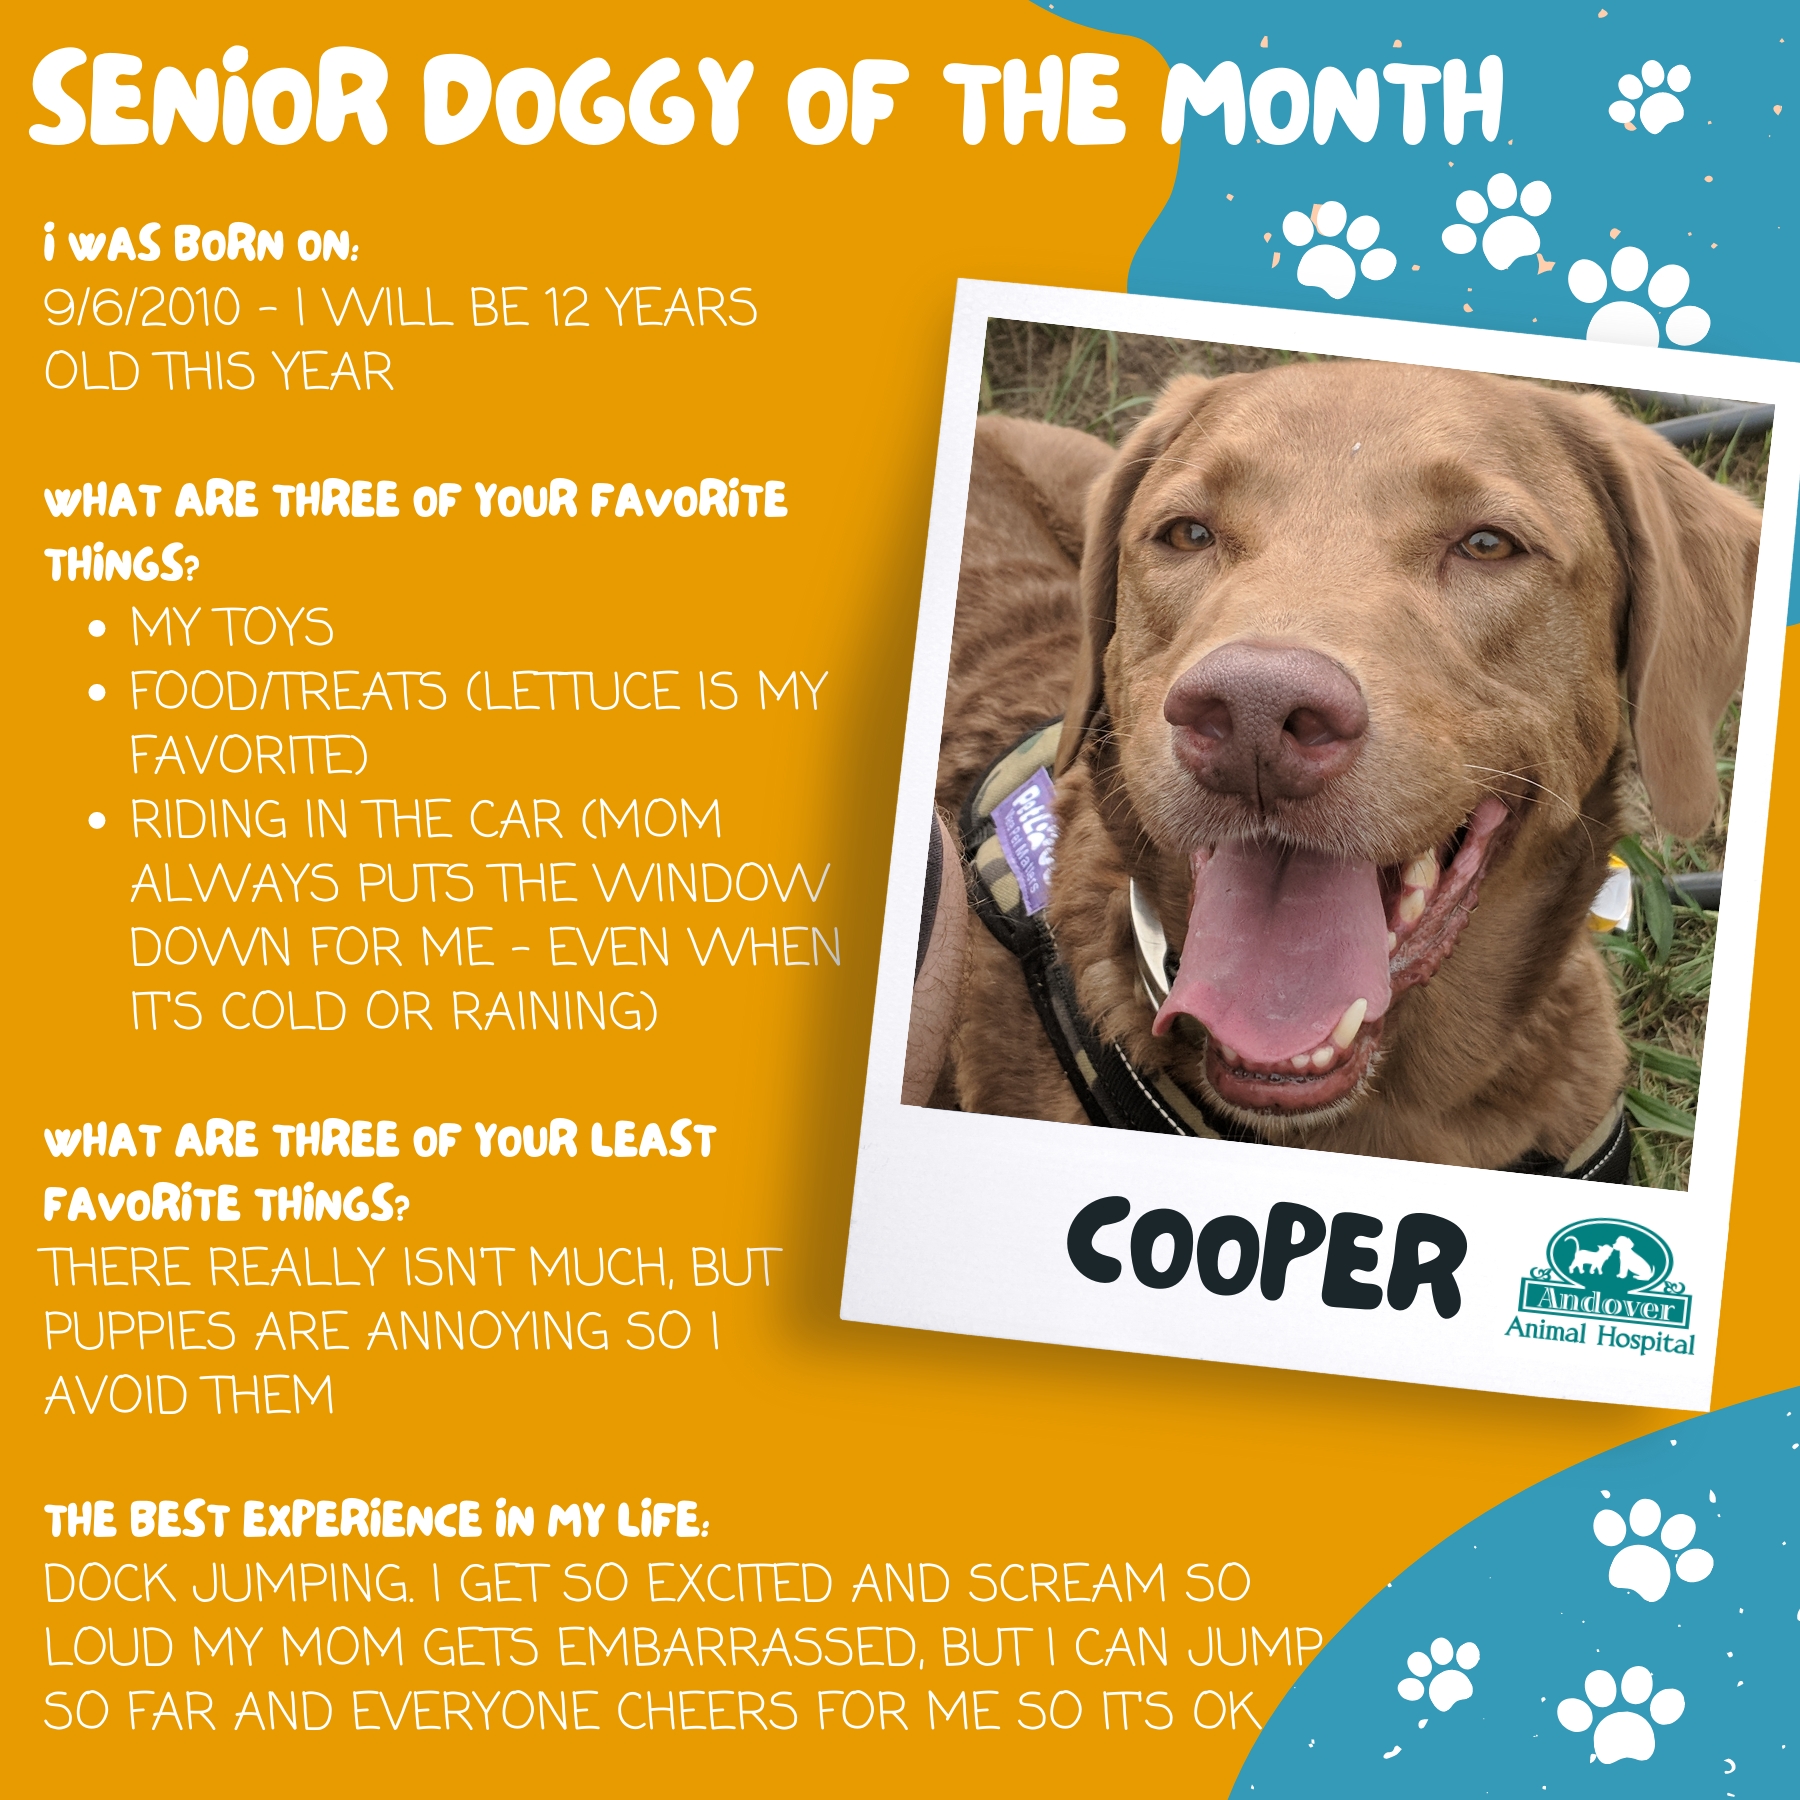 Senior Doggy of the month Jan 2022